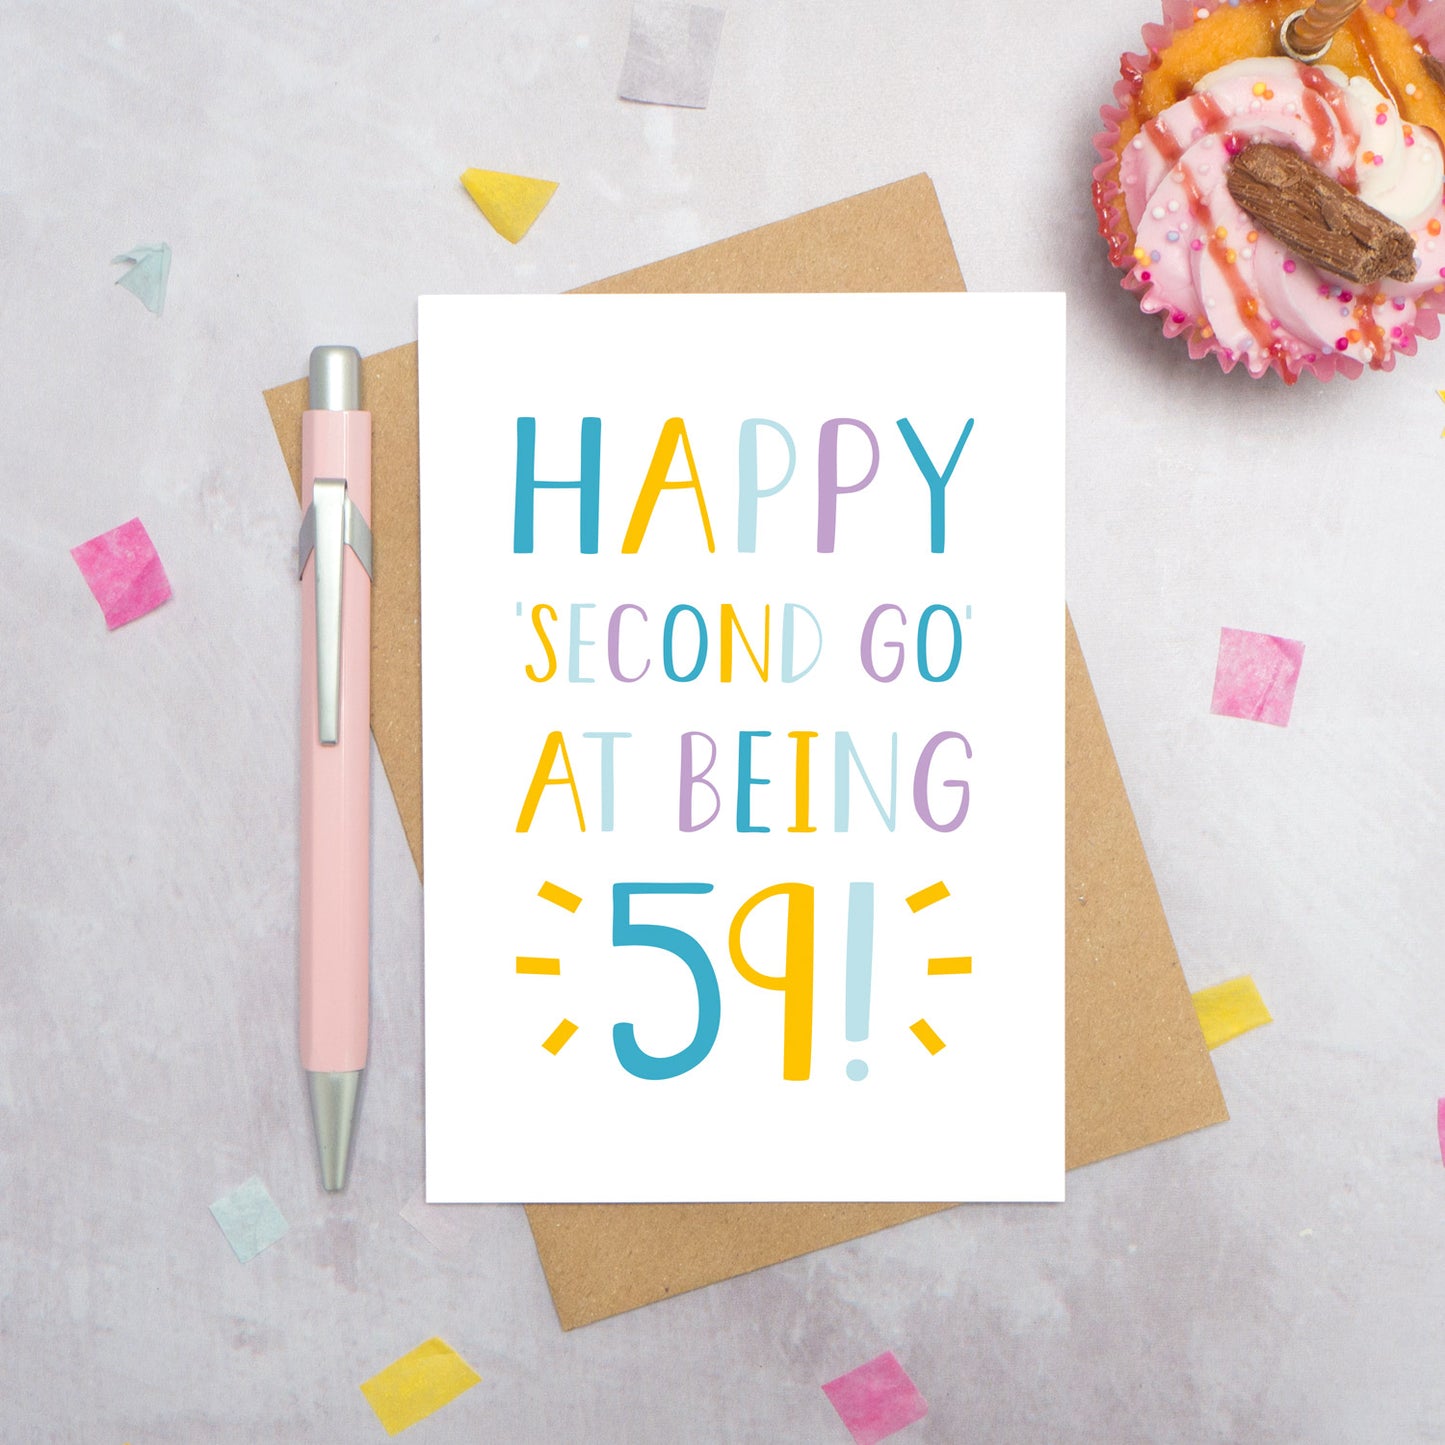 Happy second go at being 59 - milestone age card in blue, yellow and purple photographed on a grey background surrounded by a cupcake, pen and confetti.